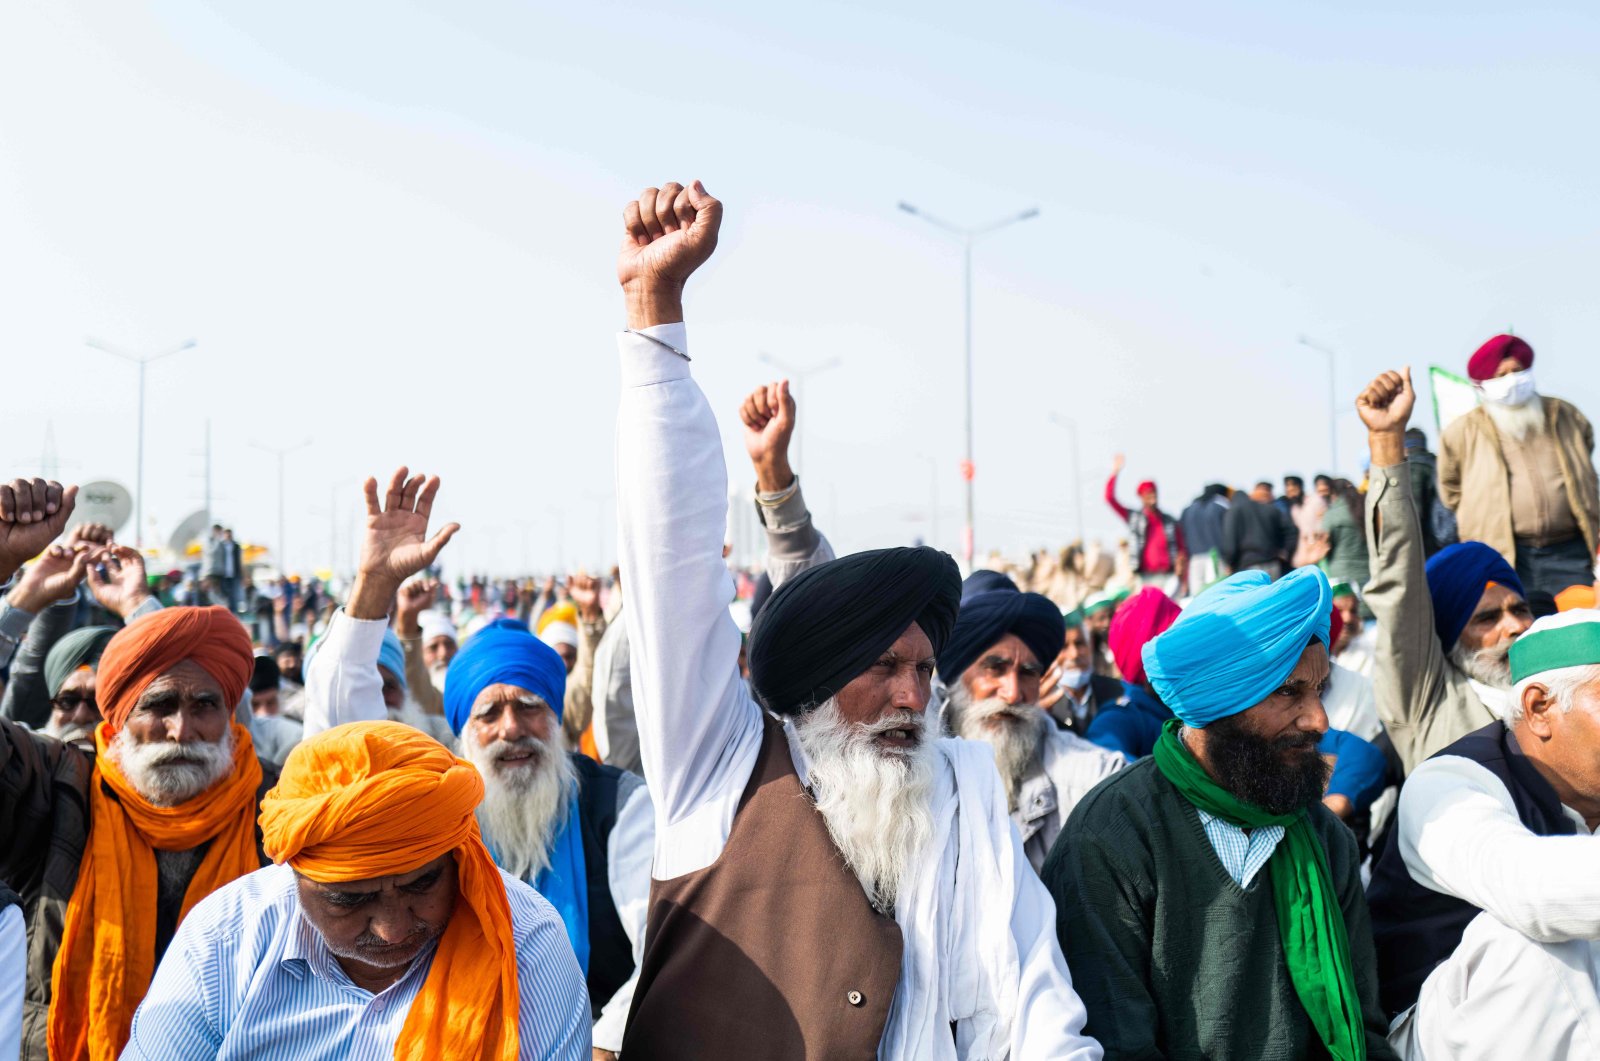 Farmers shout slogans during a demonstration blocking a highway to protest against the recent agricultural reforms at the Delhi-Uttar Pradesh state border in Ghazipur, India, Dec. 14, 2020. (AFP Photo)